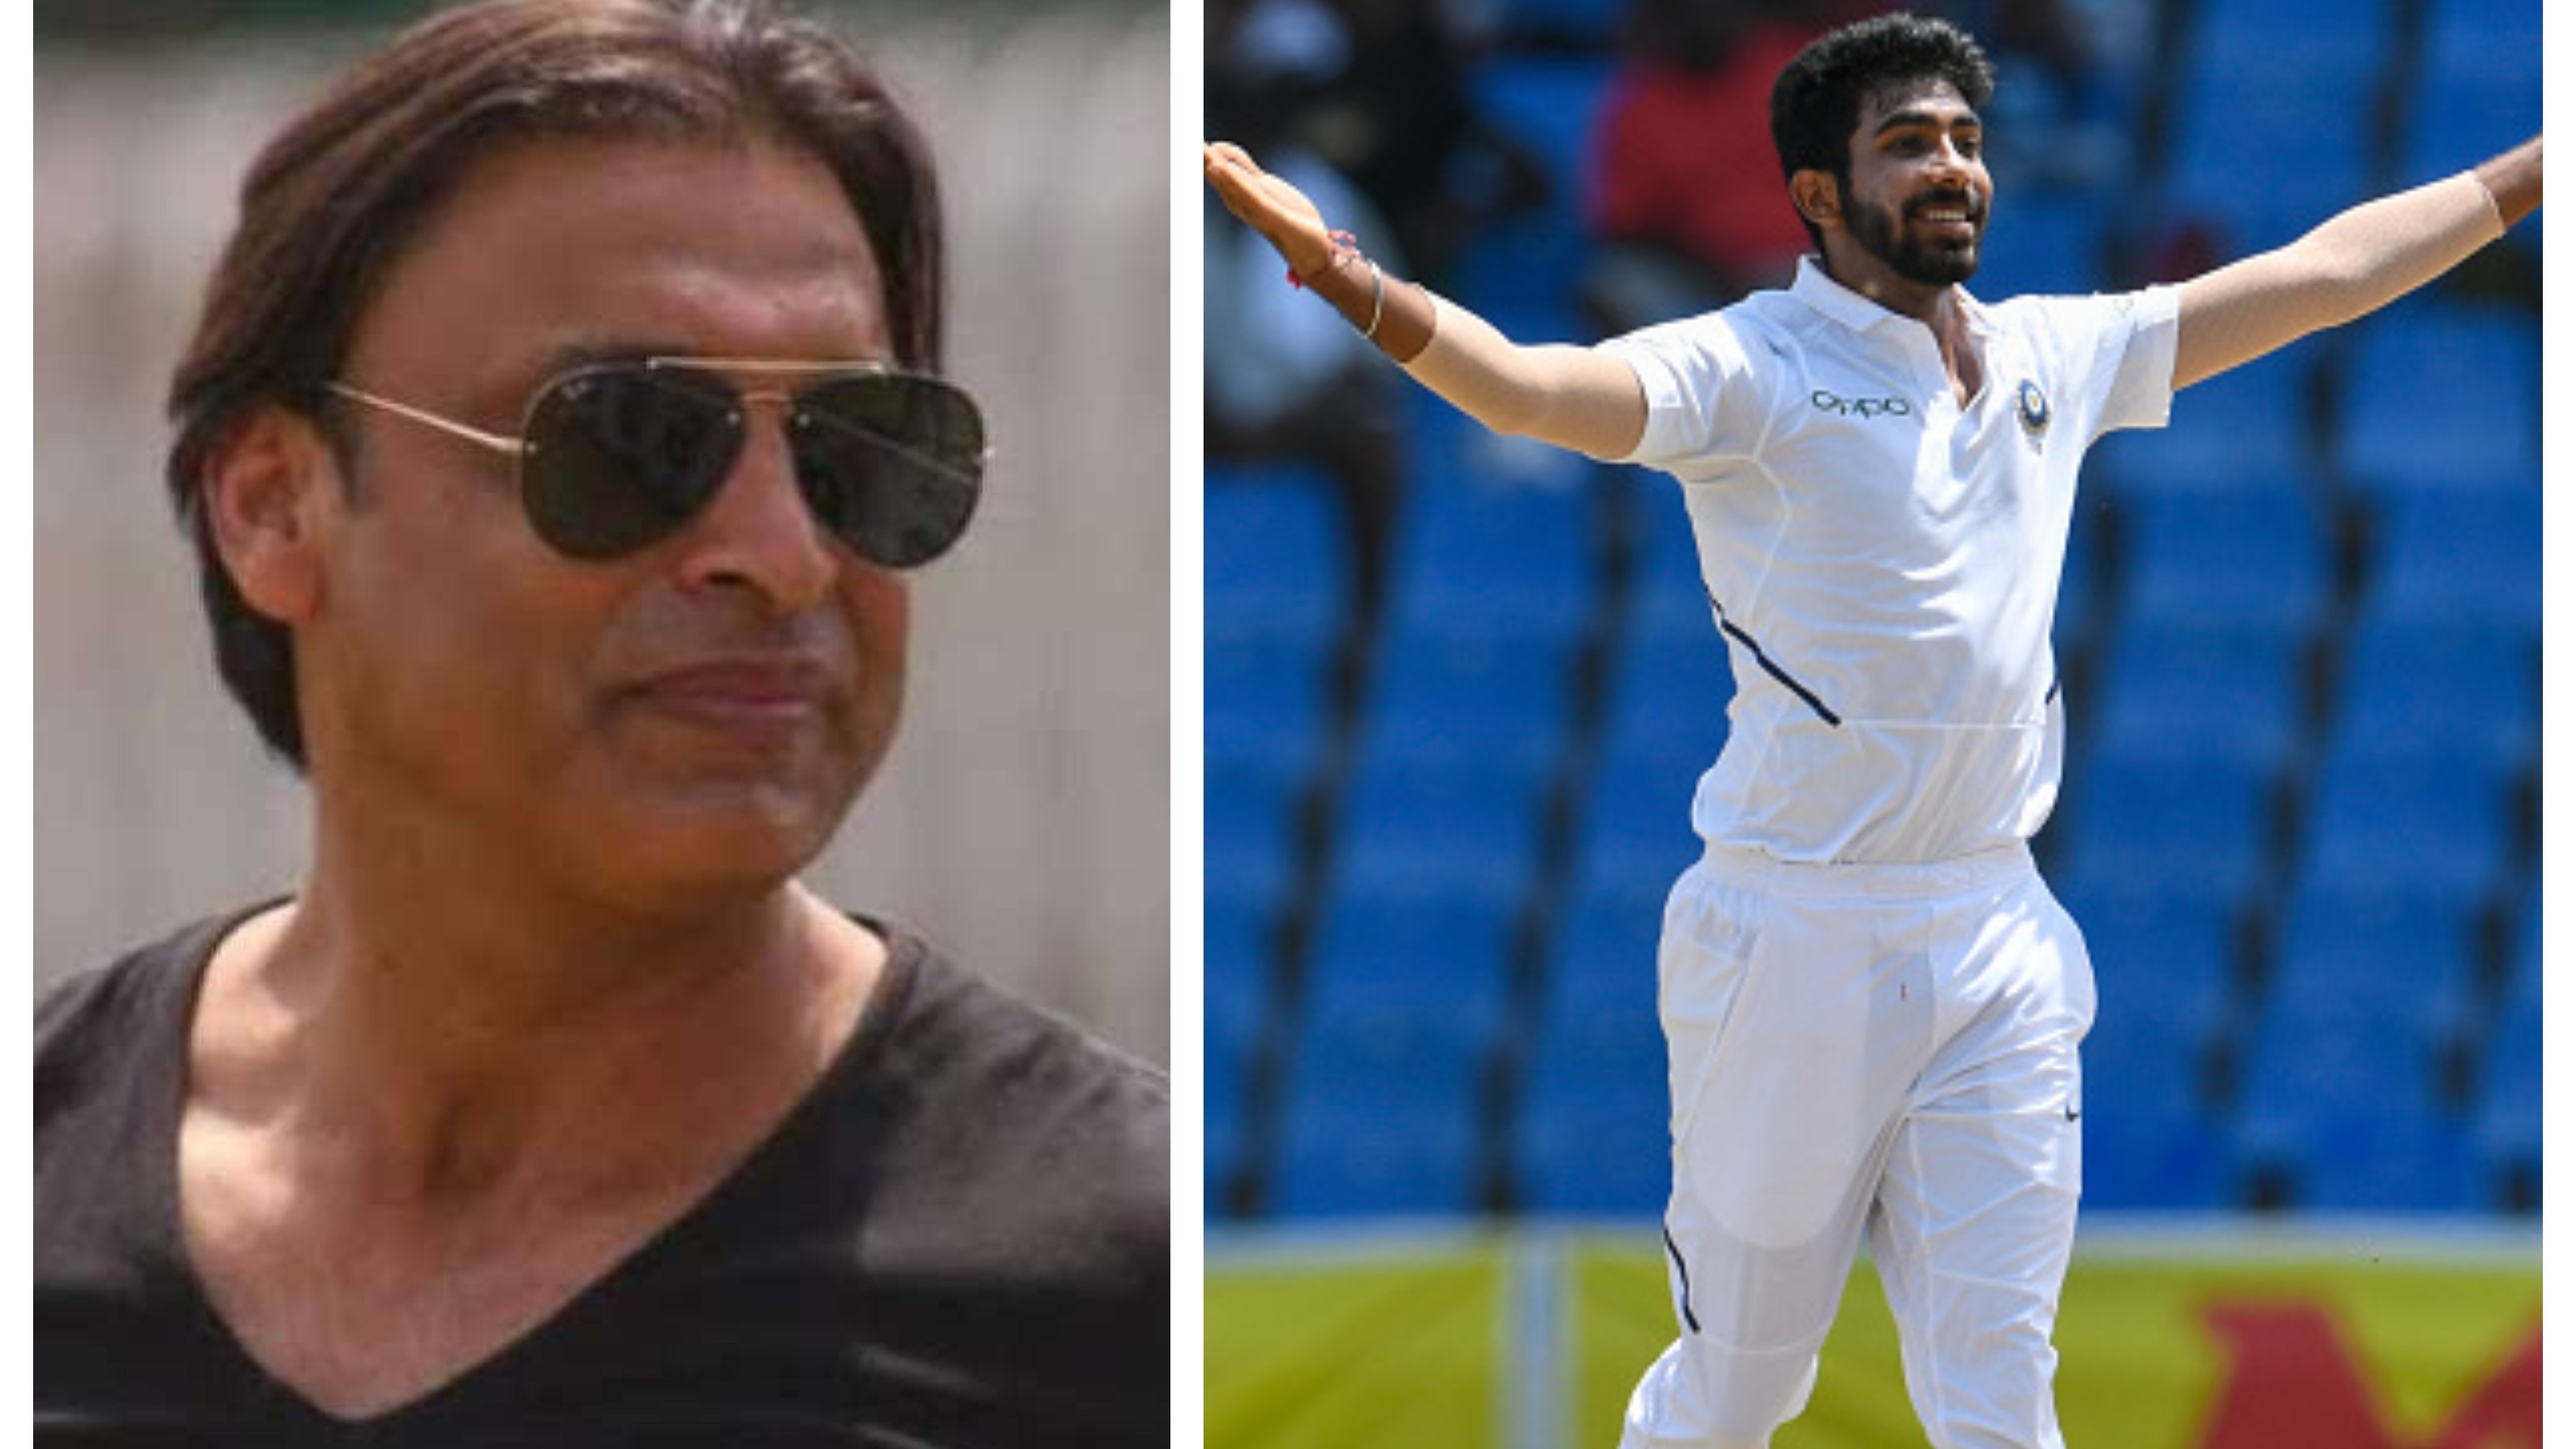 Shoaib Akhtar calls Jasprit Bumrah’s bowling action ‘difficult’, says he can’t play in all formats